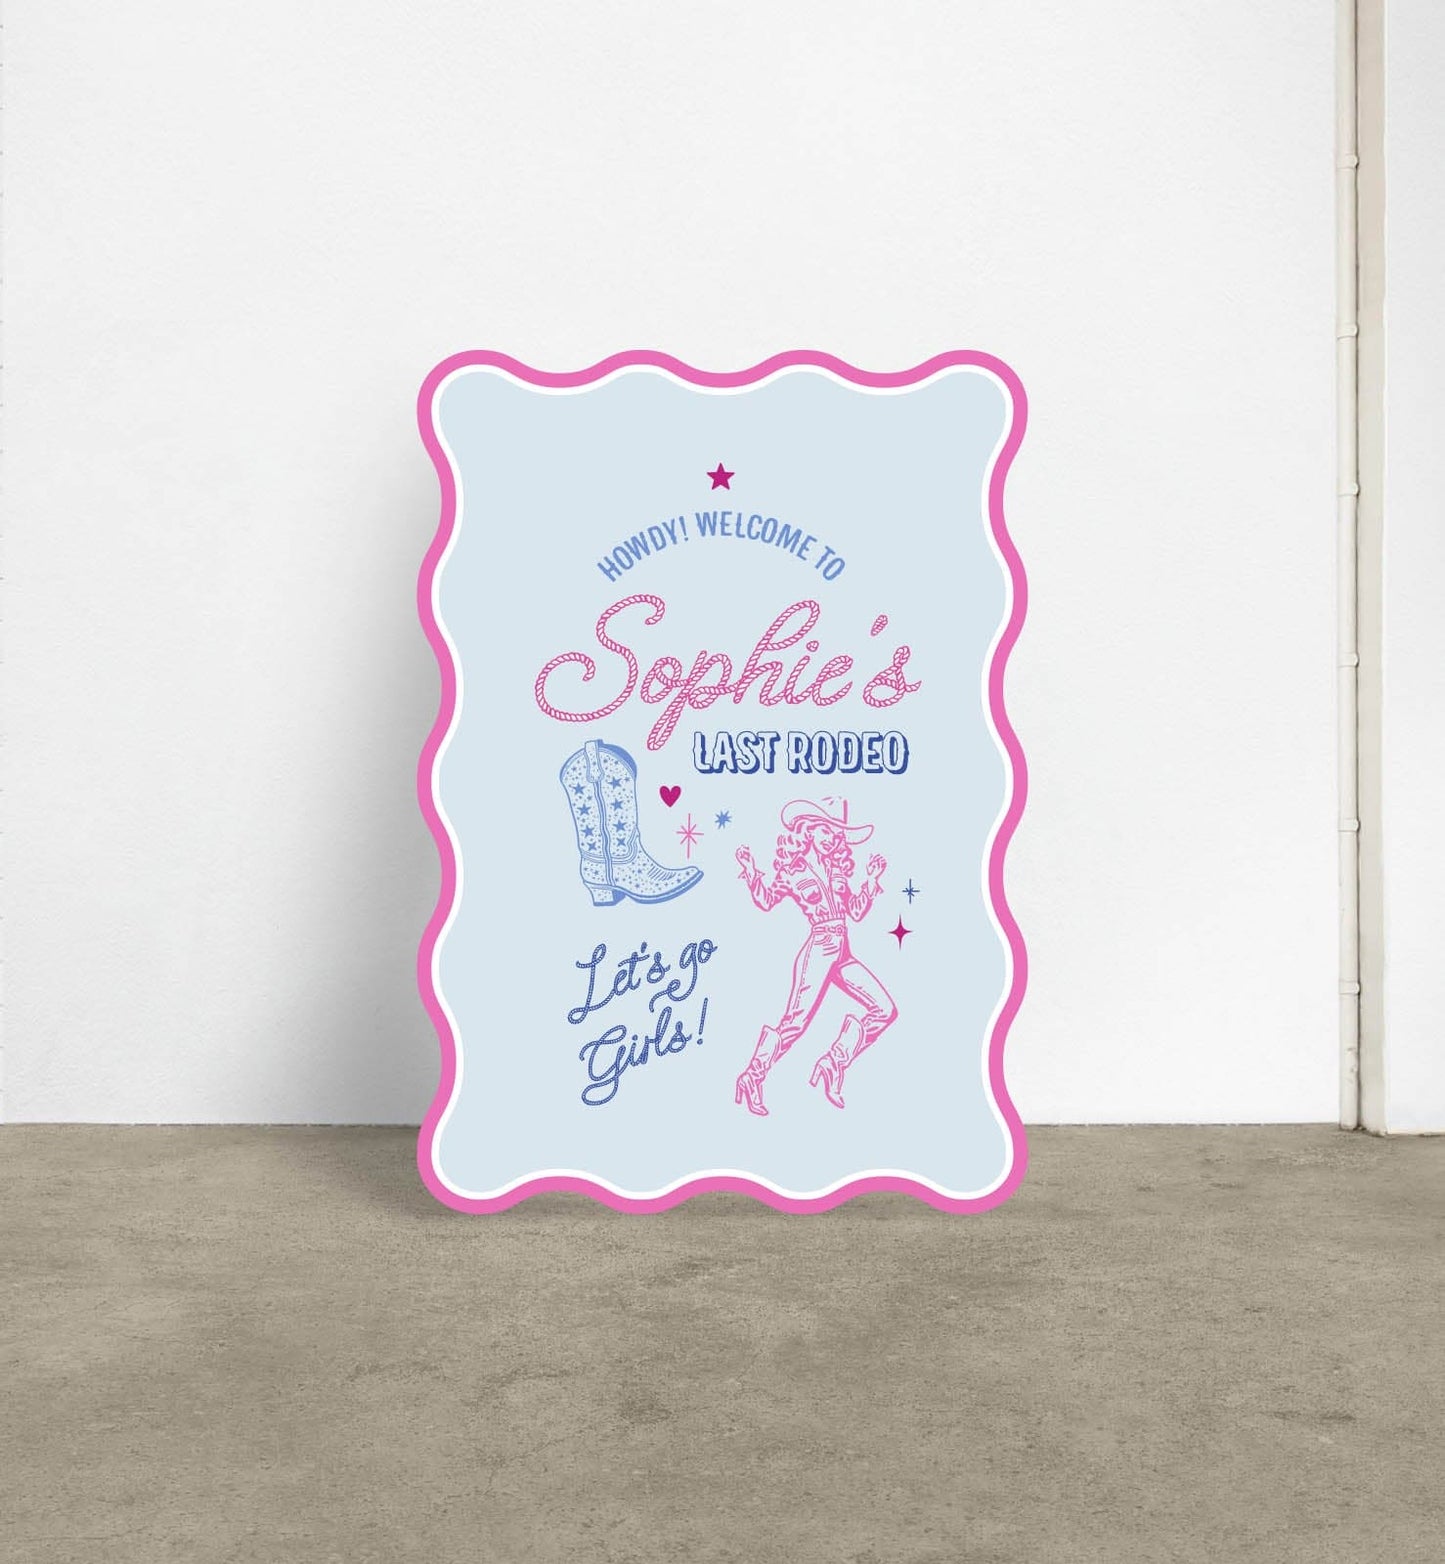 Last Rodeo Bridal Shower Sign